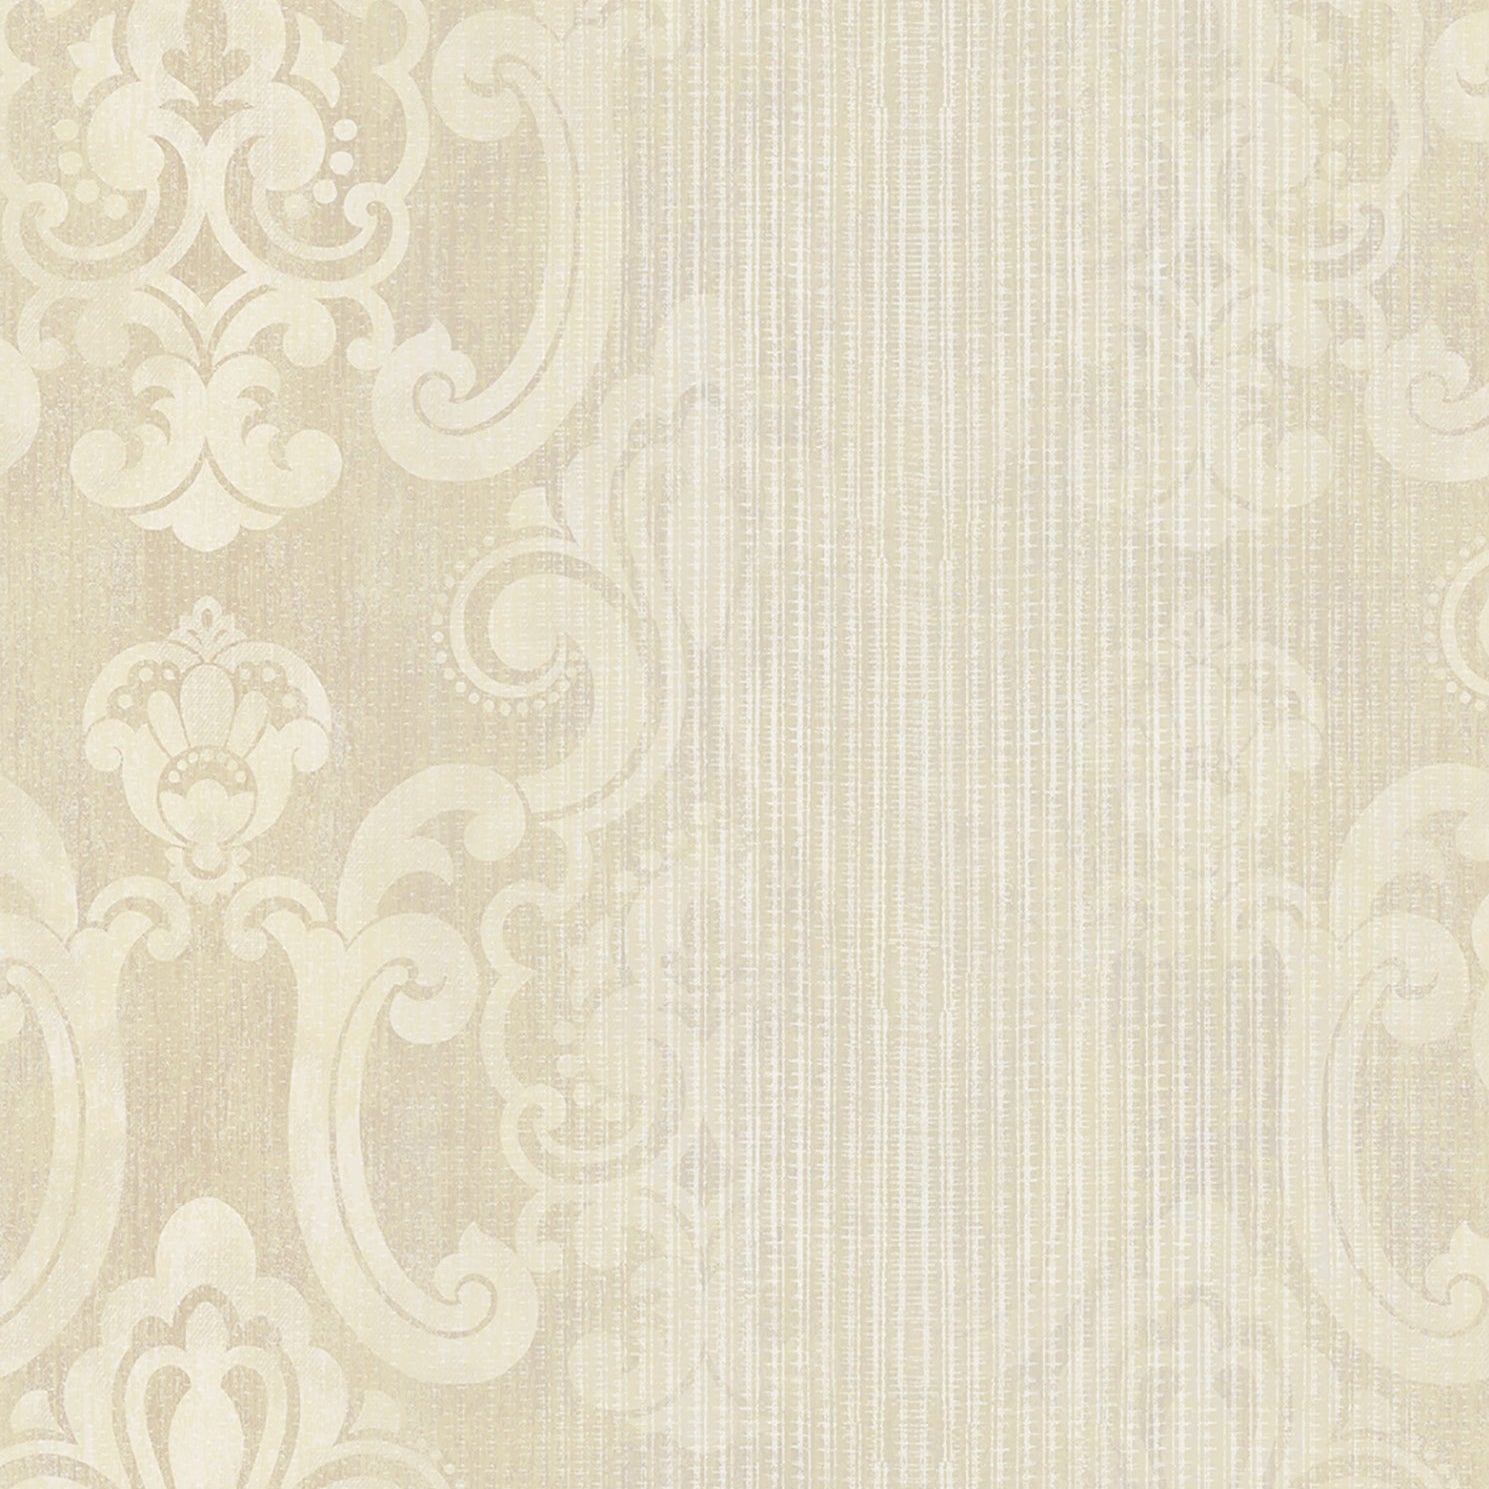 Purchase 2810-SH01041 Tradition Ariana Striped Damask by Advantage